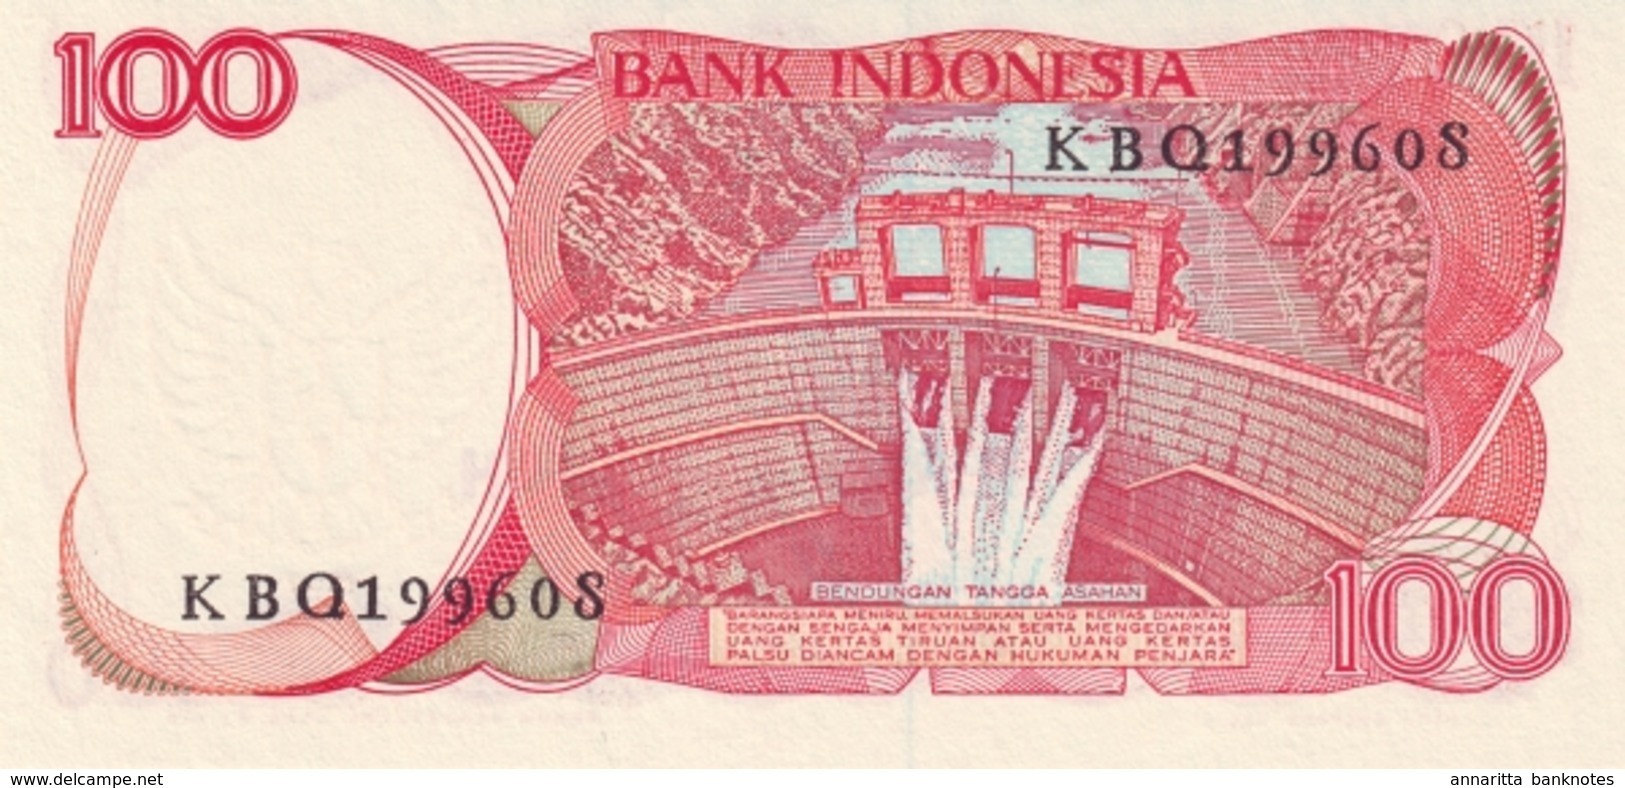 INDONESIA 100 RUPIAH 1984 P-122b UNC   LITHOGRAPHED [ID580b] - Indonesien